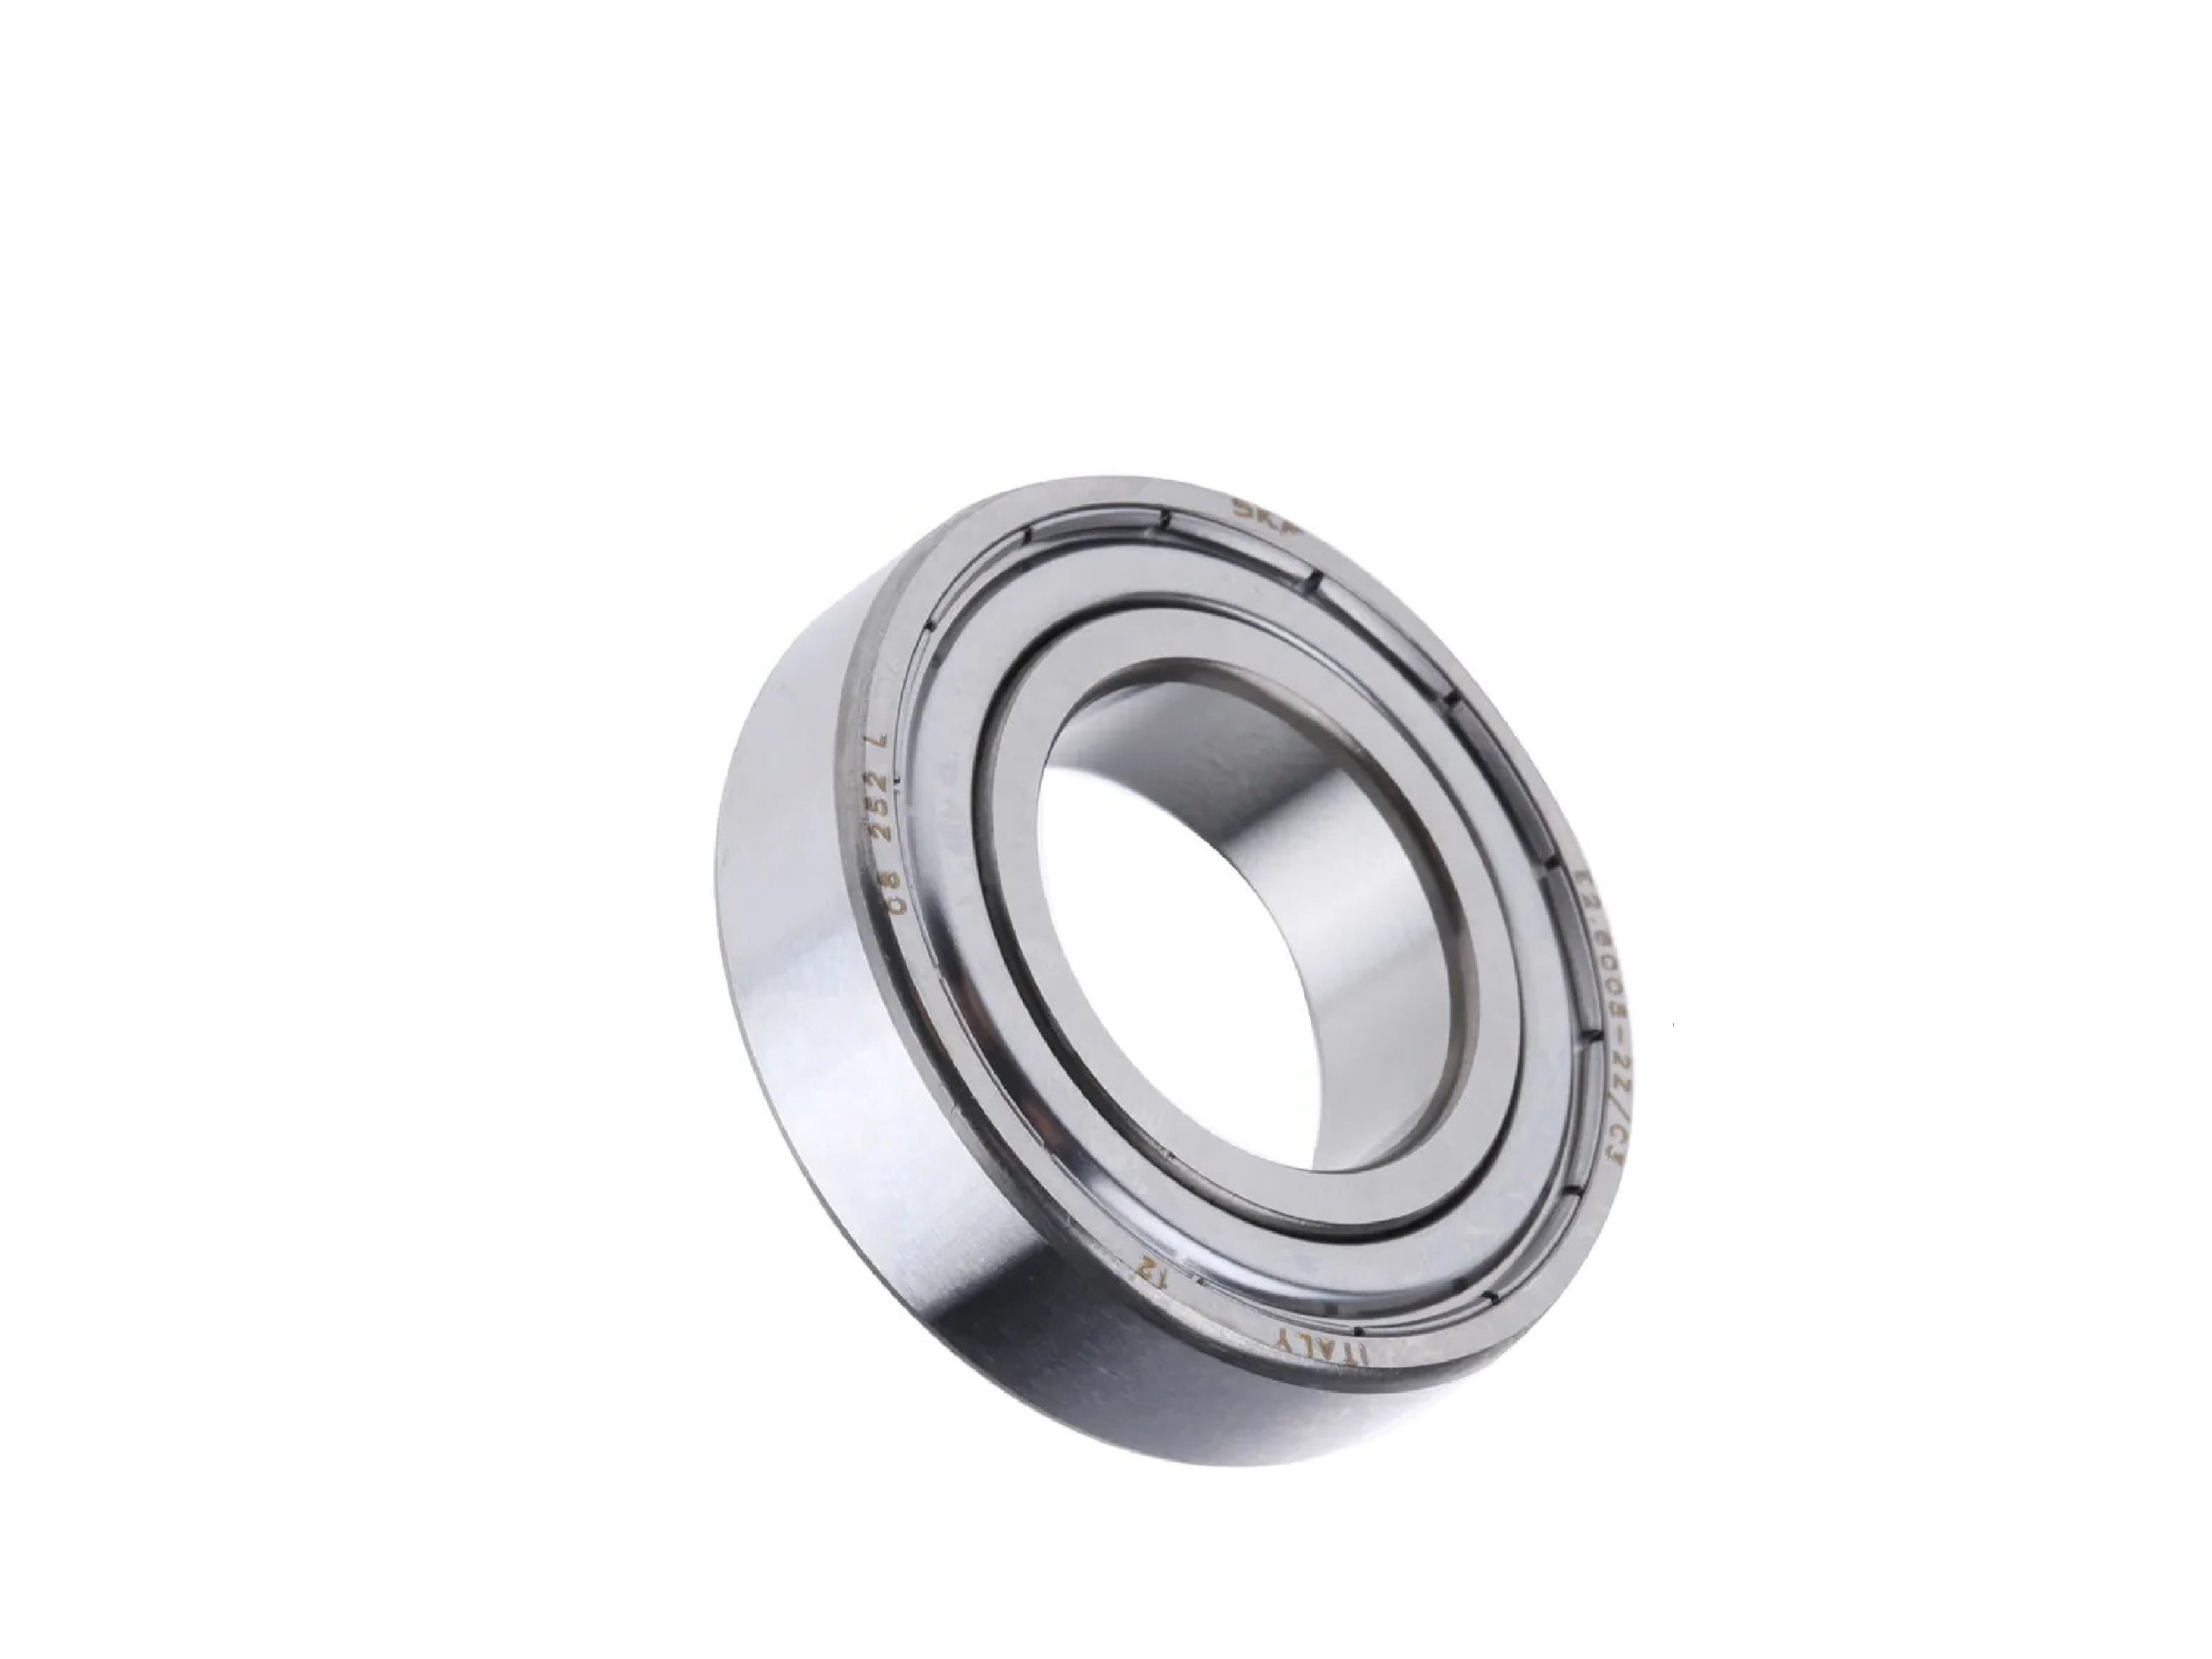 E2.6205-2RSH/C3 SKF Energy Efficient Ball Bearing With Seals 25x52x15mm 